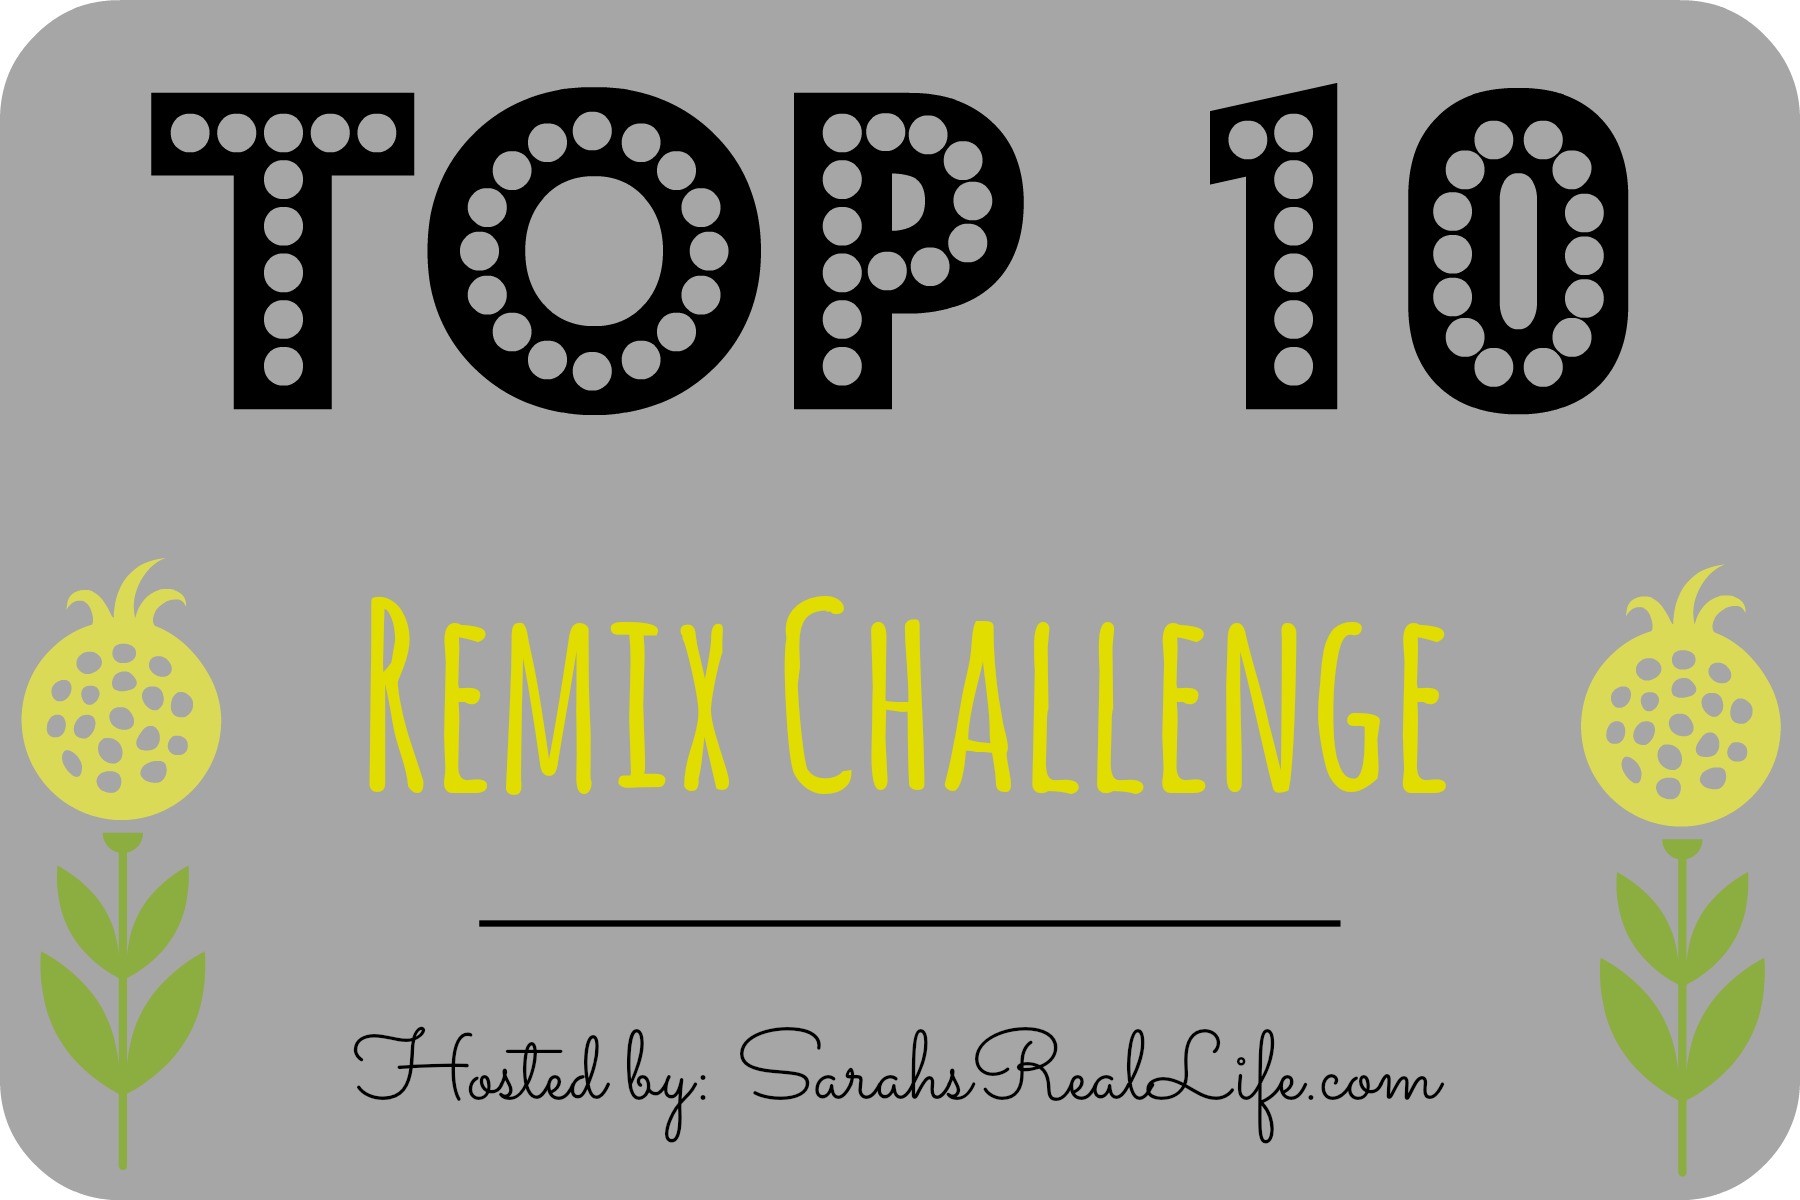 Announcing the Top 10 Remix Challenge!